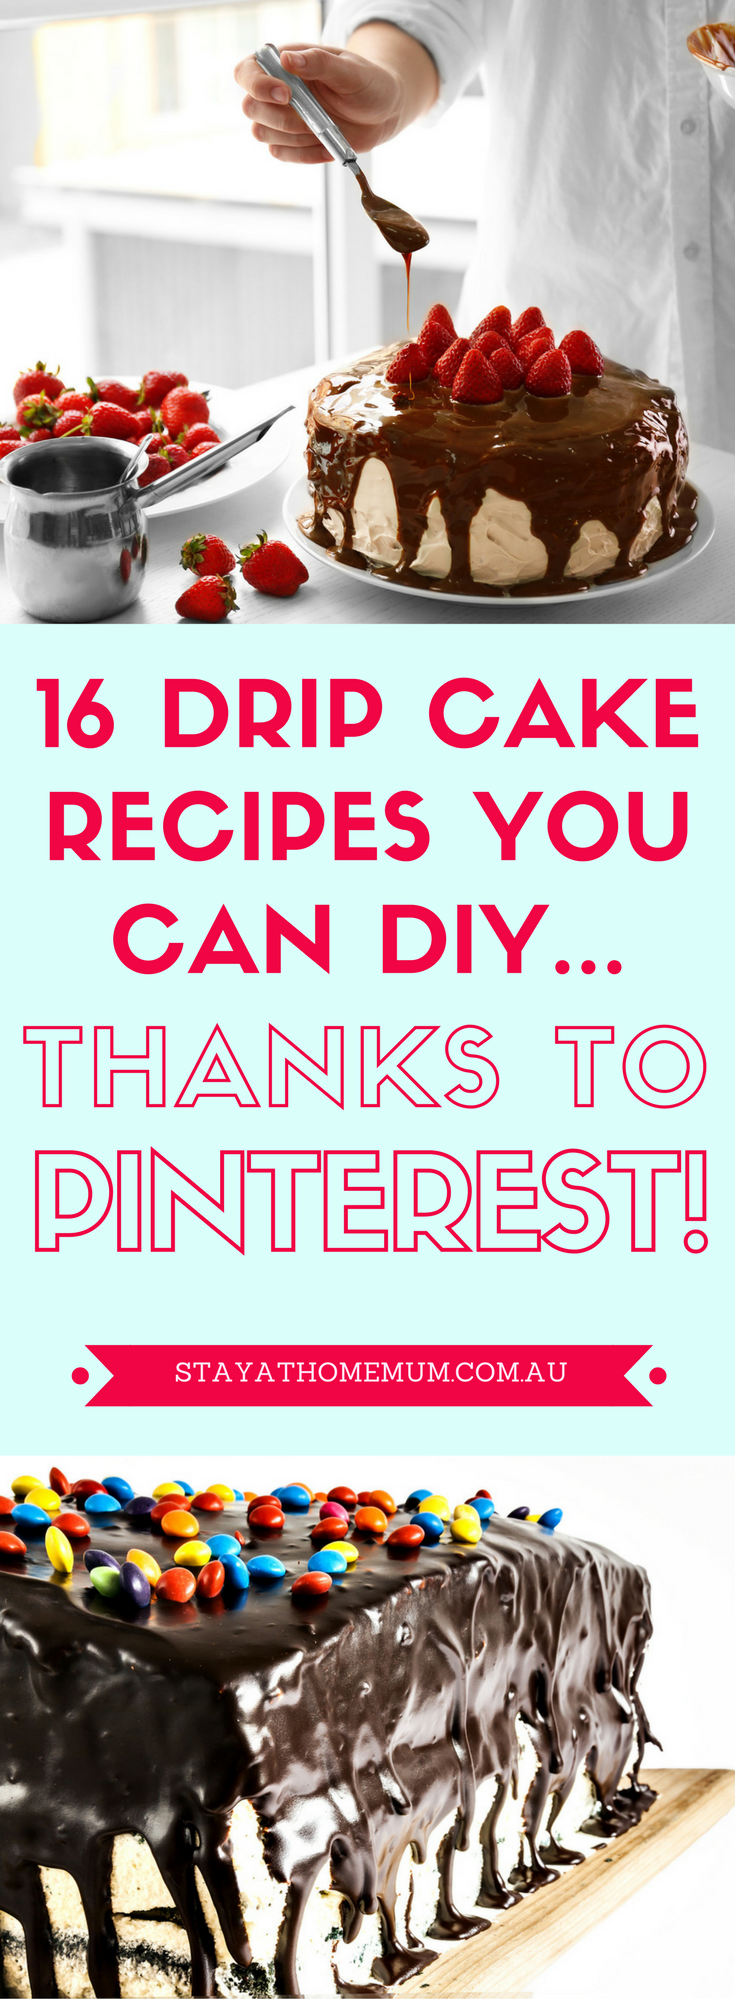 16 Drip Cake Recipes You Can DIY... Thanks To Pinterest!